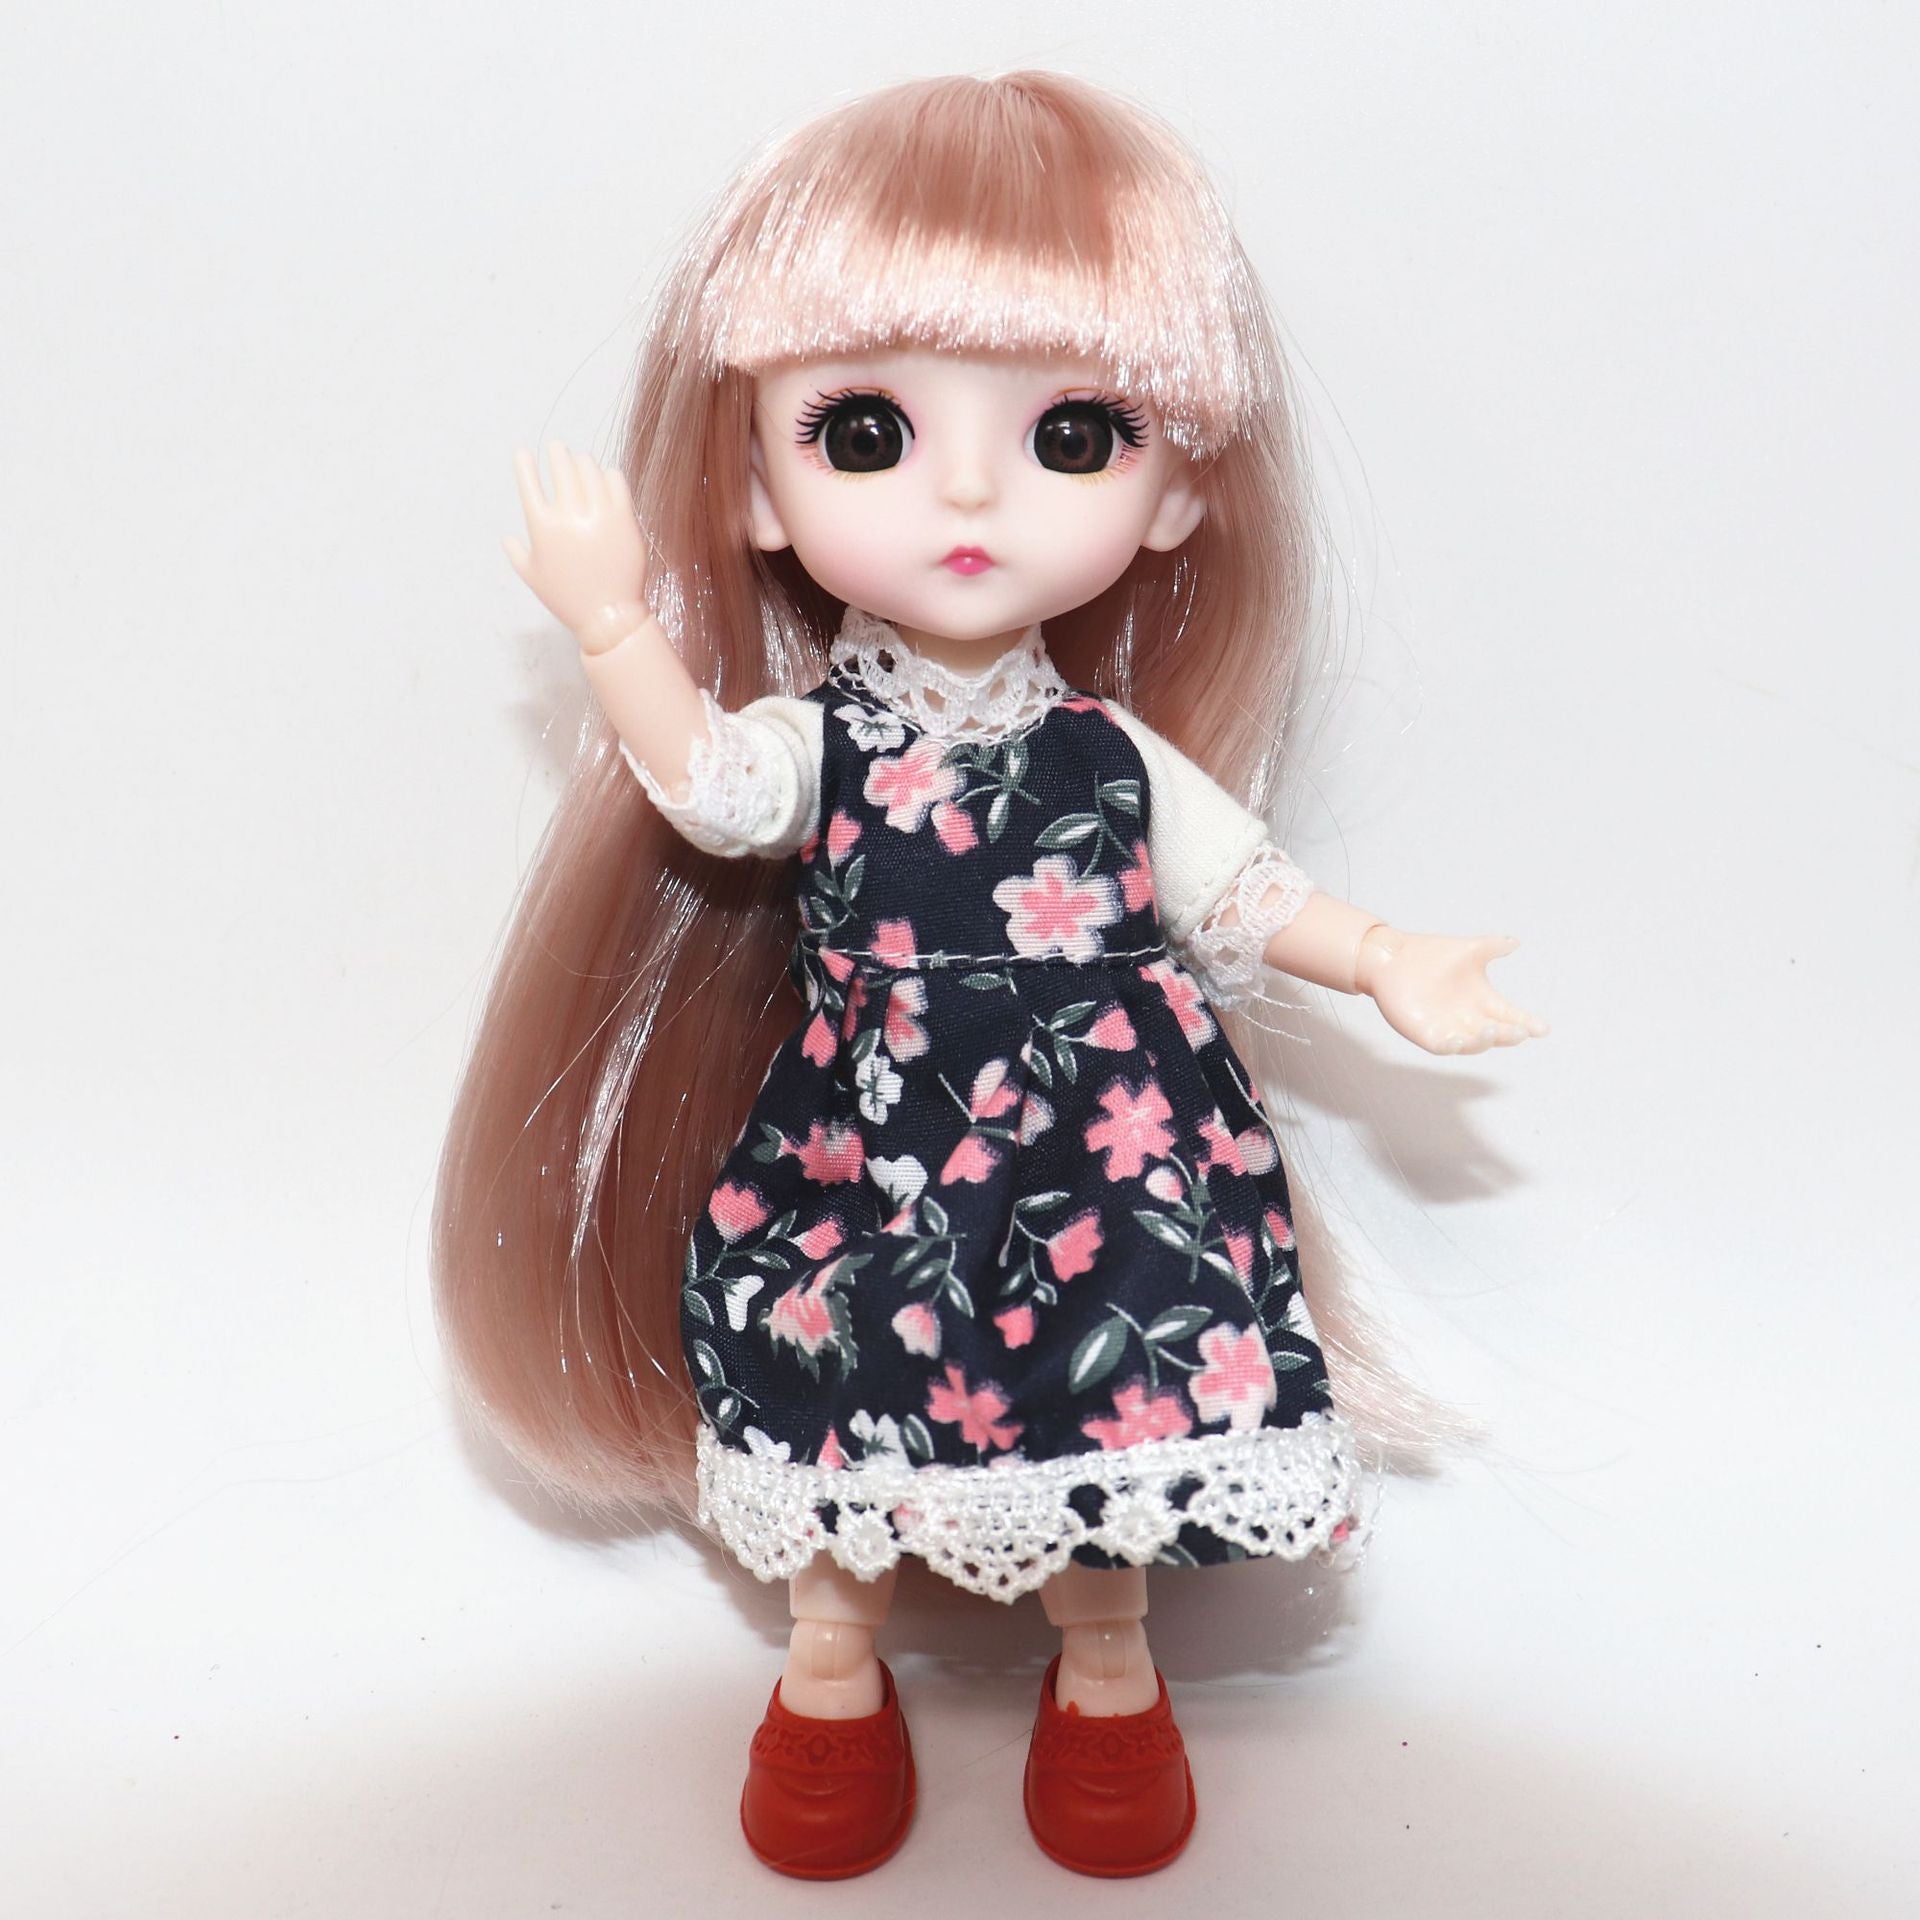 Bjd 16cm Movable Joint Doll with Real 3D Eyes and High-end Fashion Dress - DIY Girl Toy Best Gift Toyland EU Toyland EU